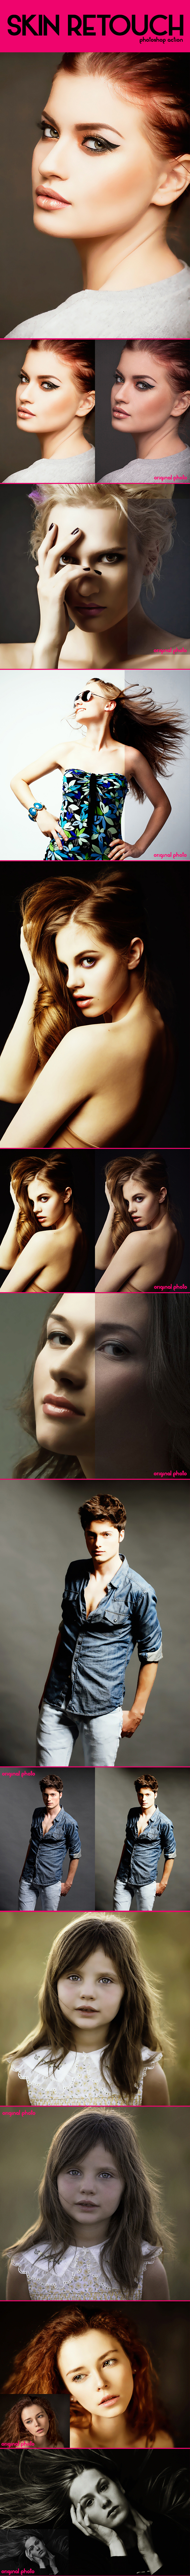 HDR skin retouch beauty clean bright soft add-ones glow skin glamour clarity